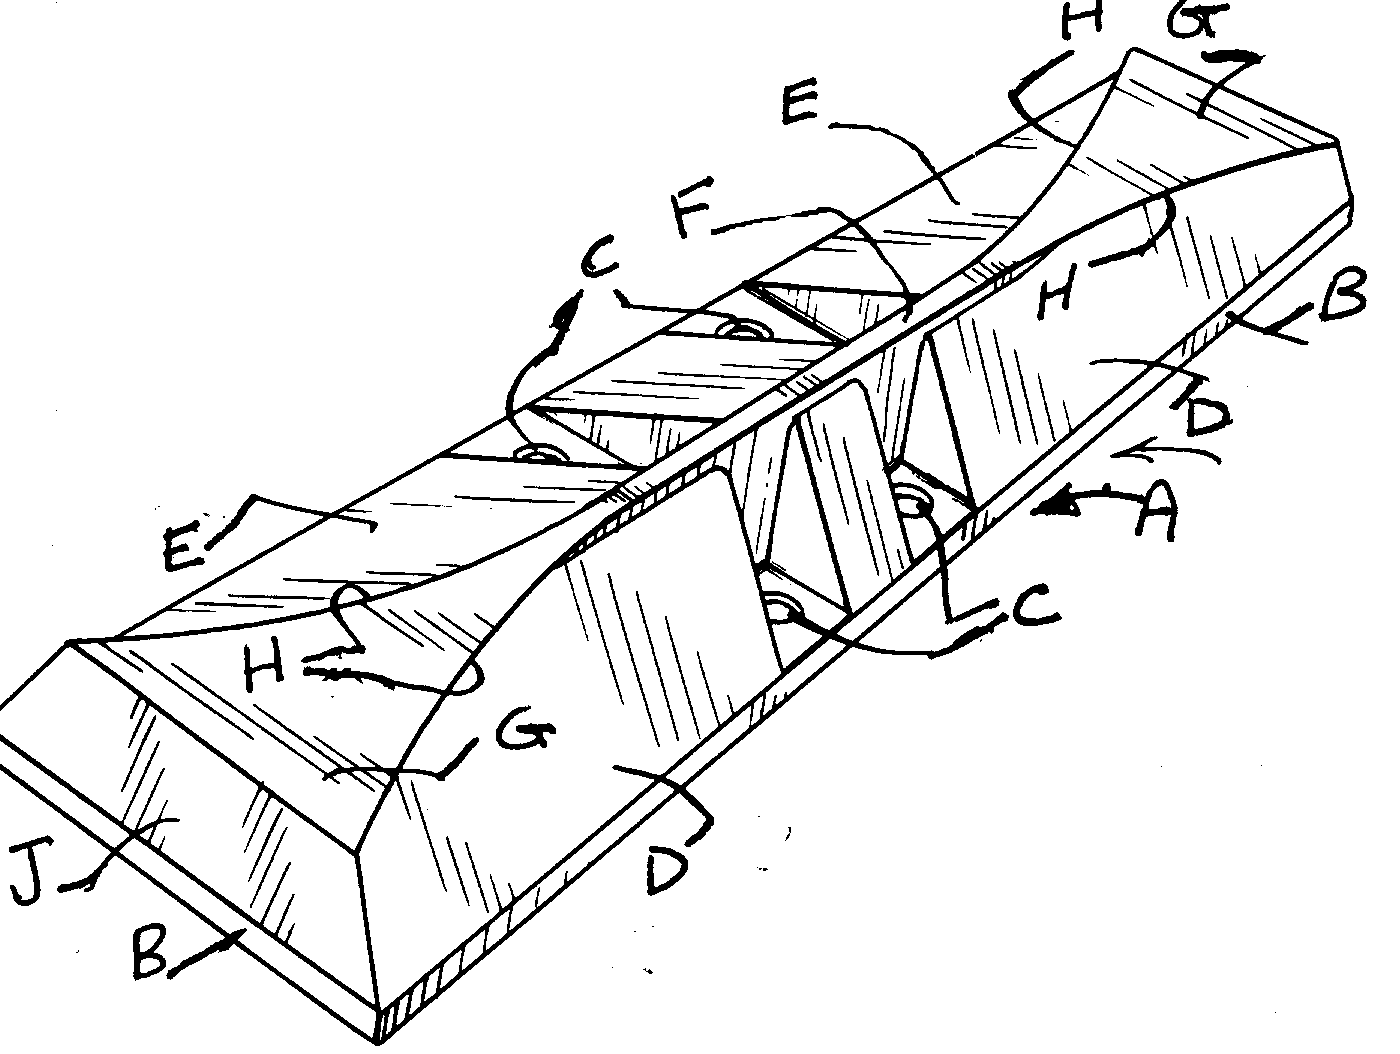 A - Grouser bar; B - Base of the bar; C - Bolt apertures; D- Forward planner service; E - Rearward planner service; F - Elongatedtrack traction portion; G - Bearing surface; H - Curved edges; J- End surface
